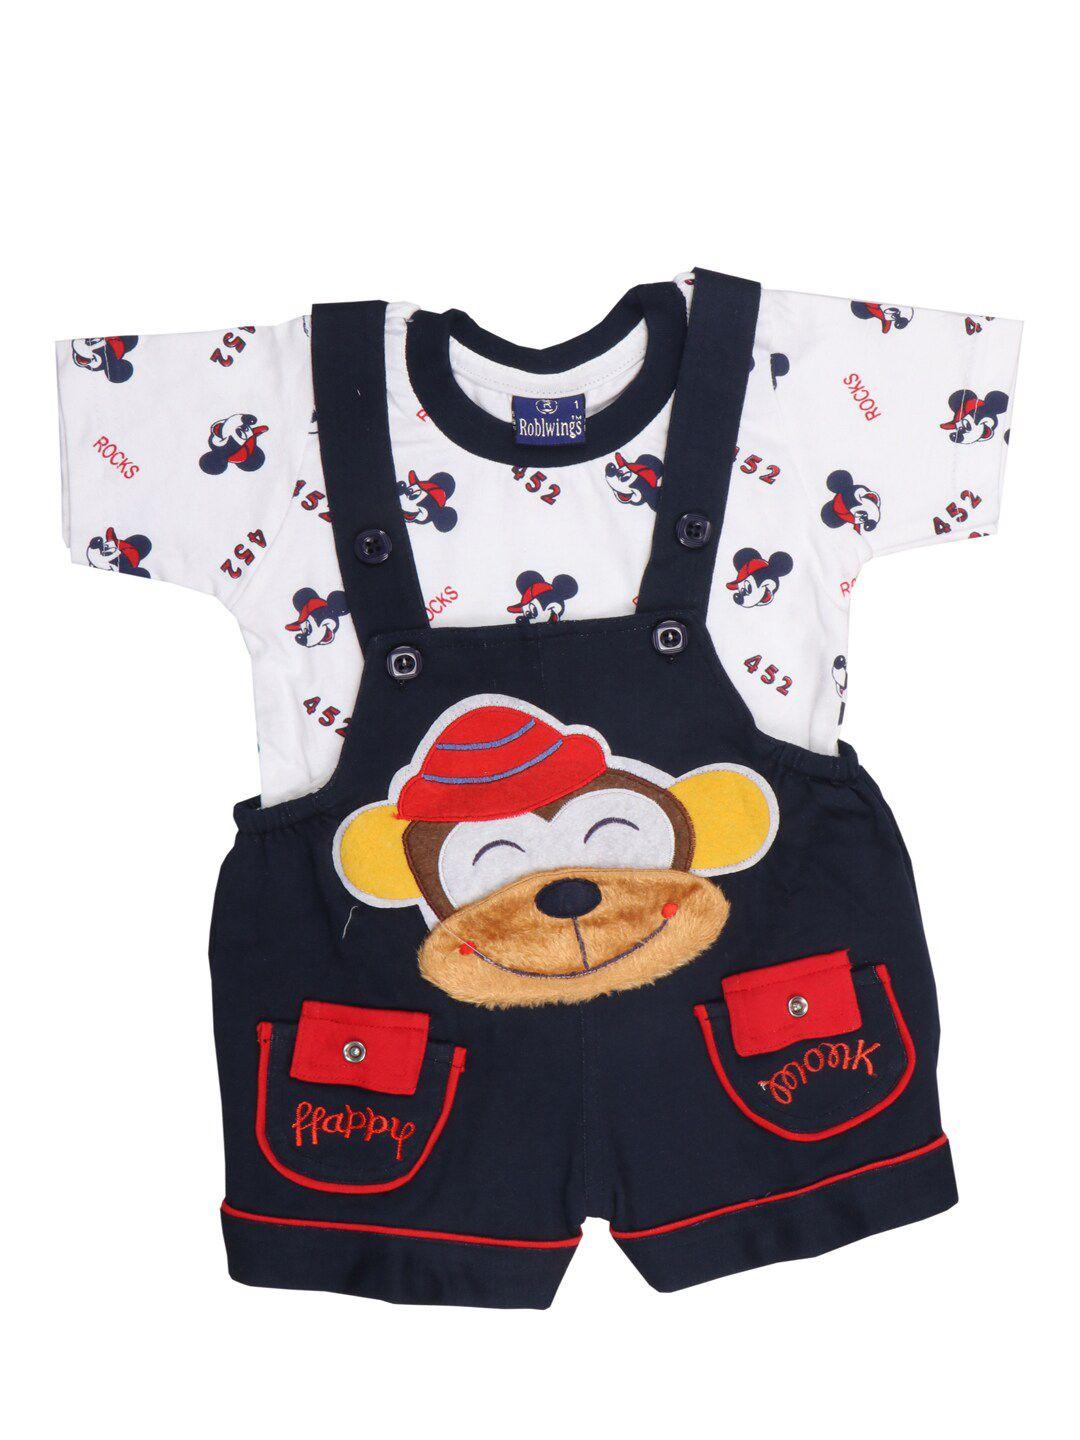 BAESD Infants Kids Printed Pure Cotton Clothing Set